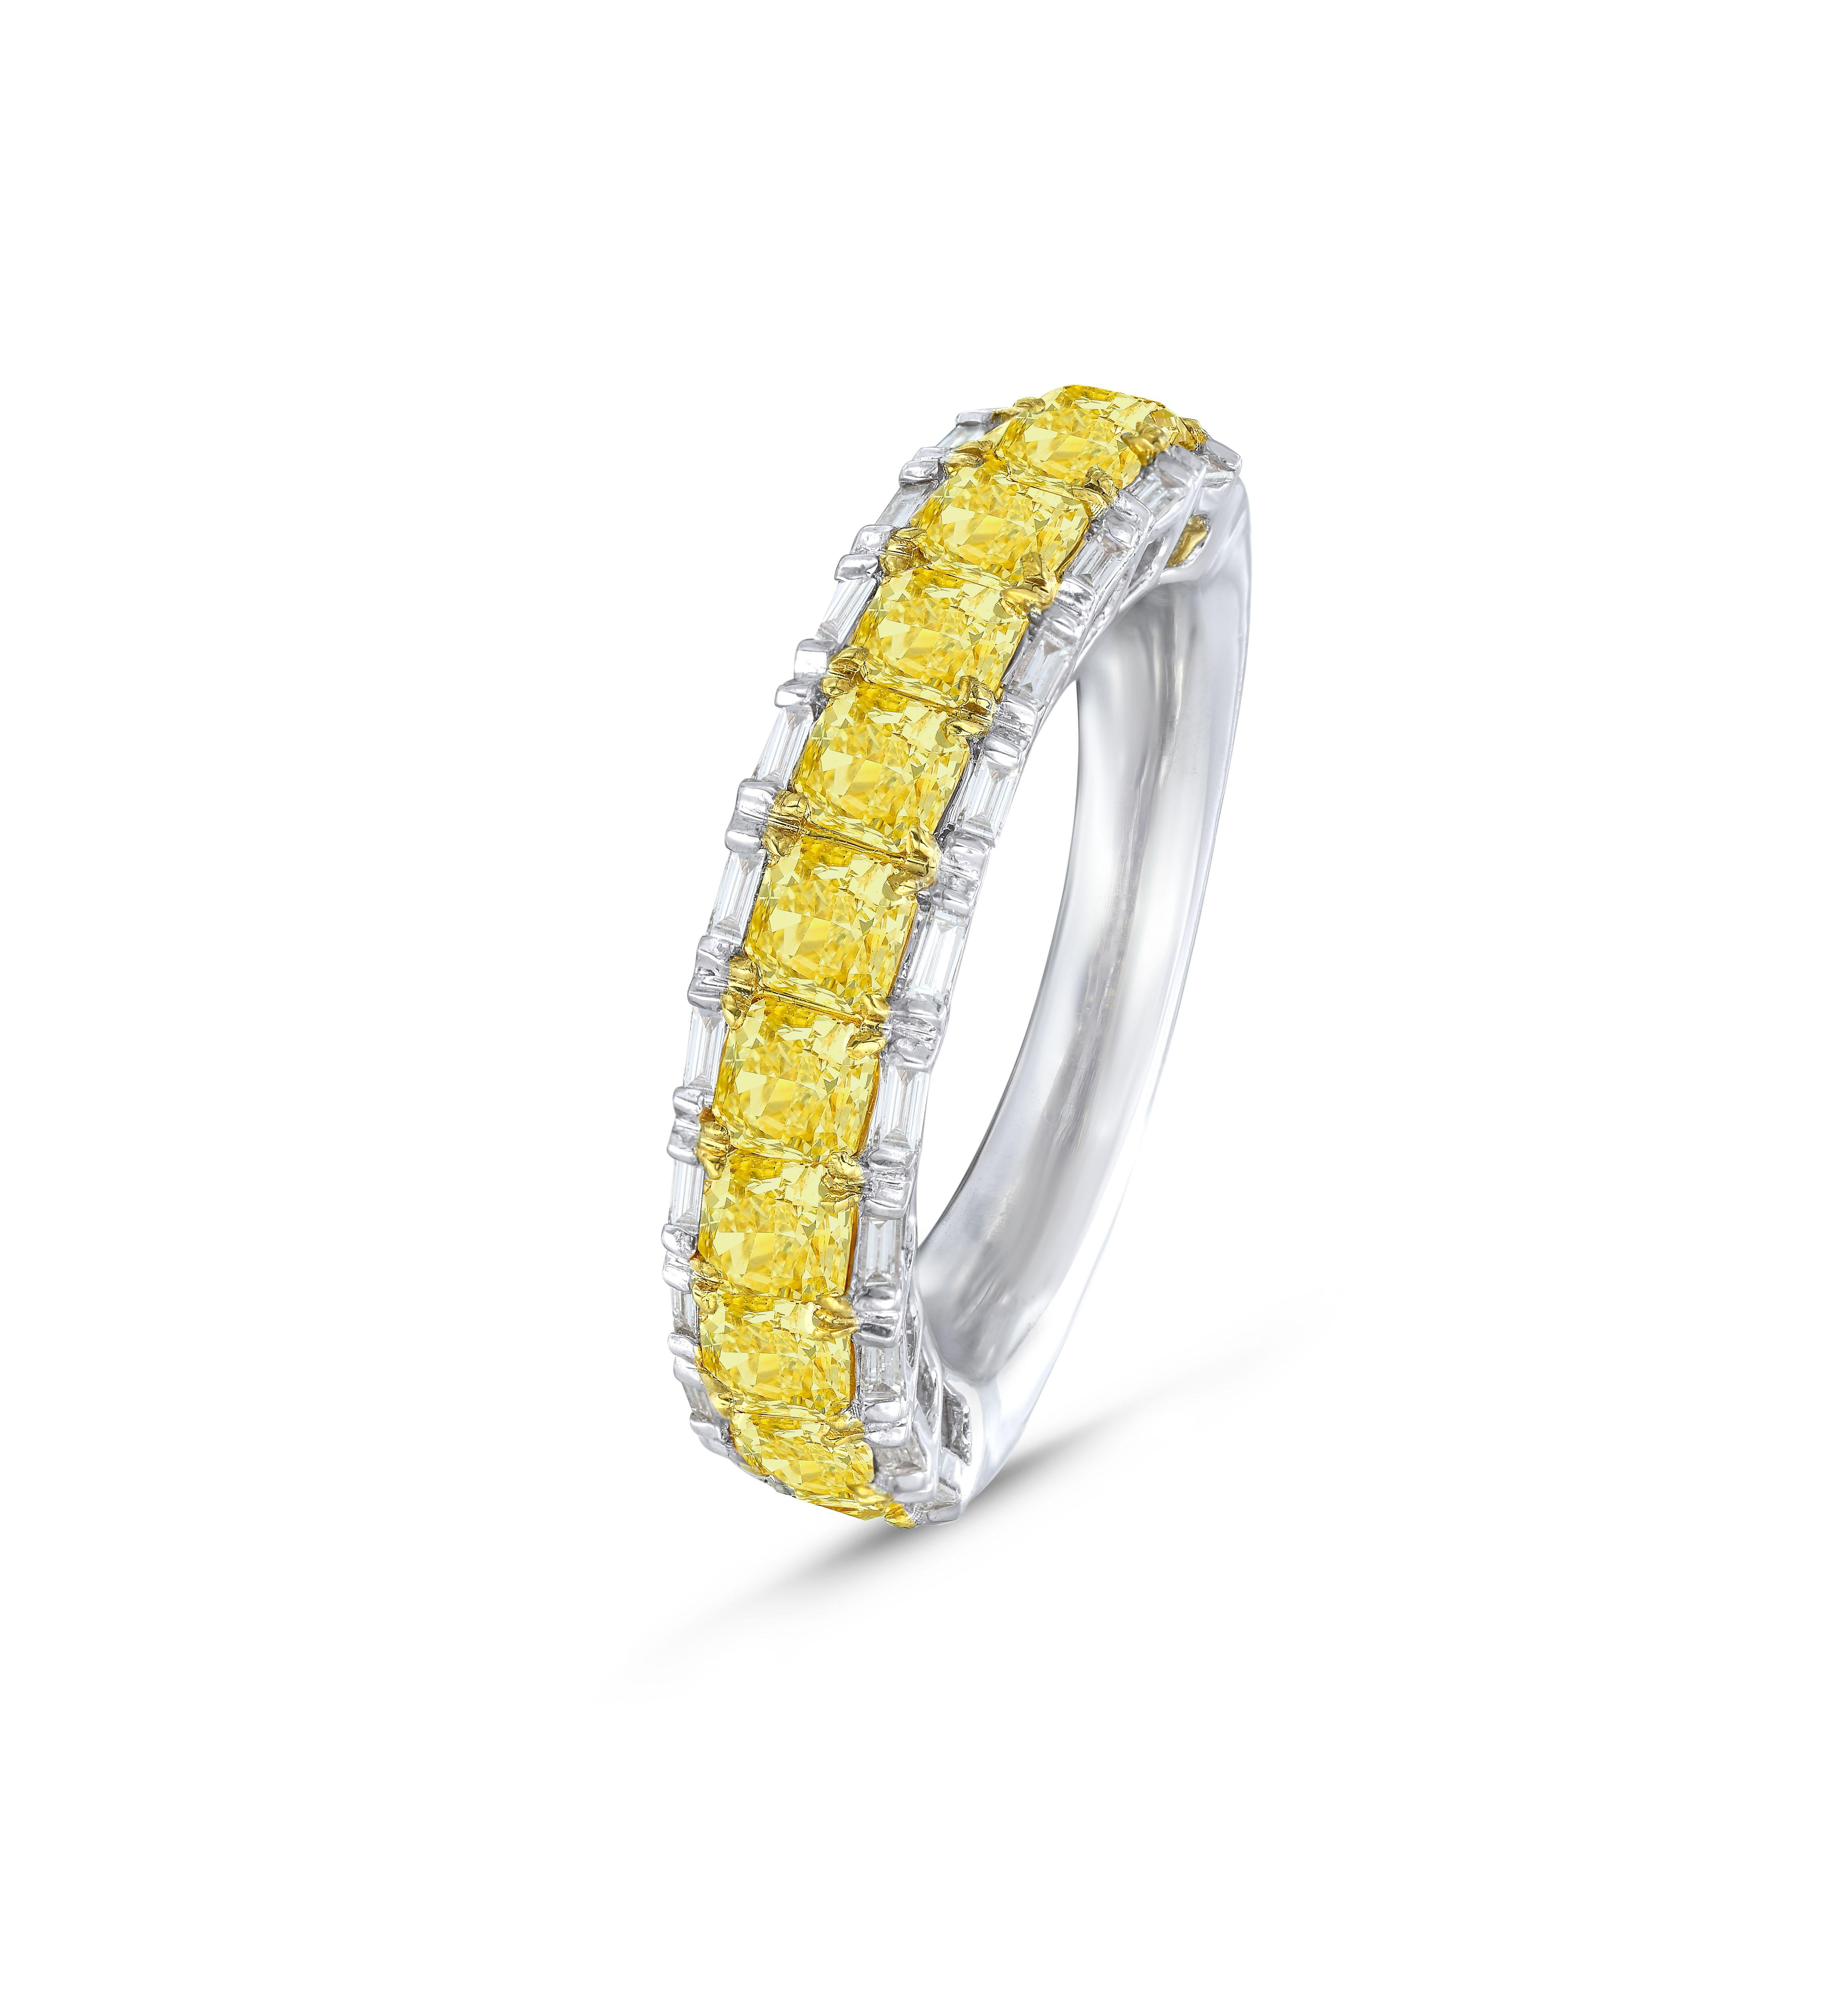 Radiant Cut Eternity Band with Baguette Full, 6.19 Carat